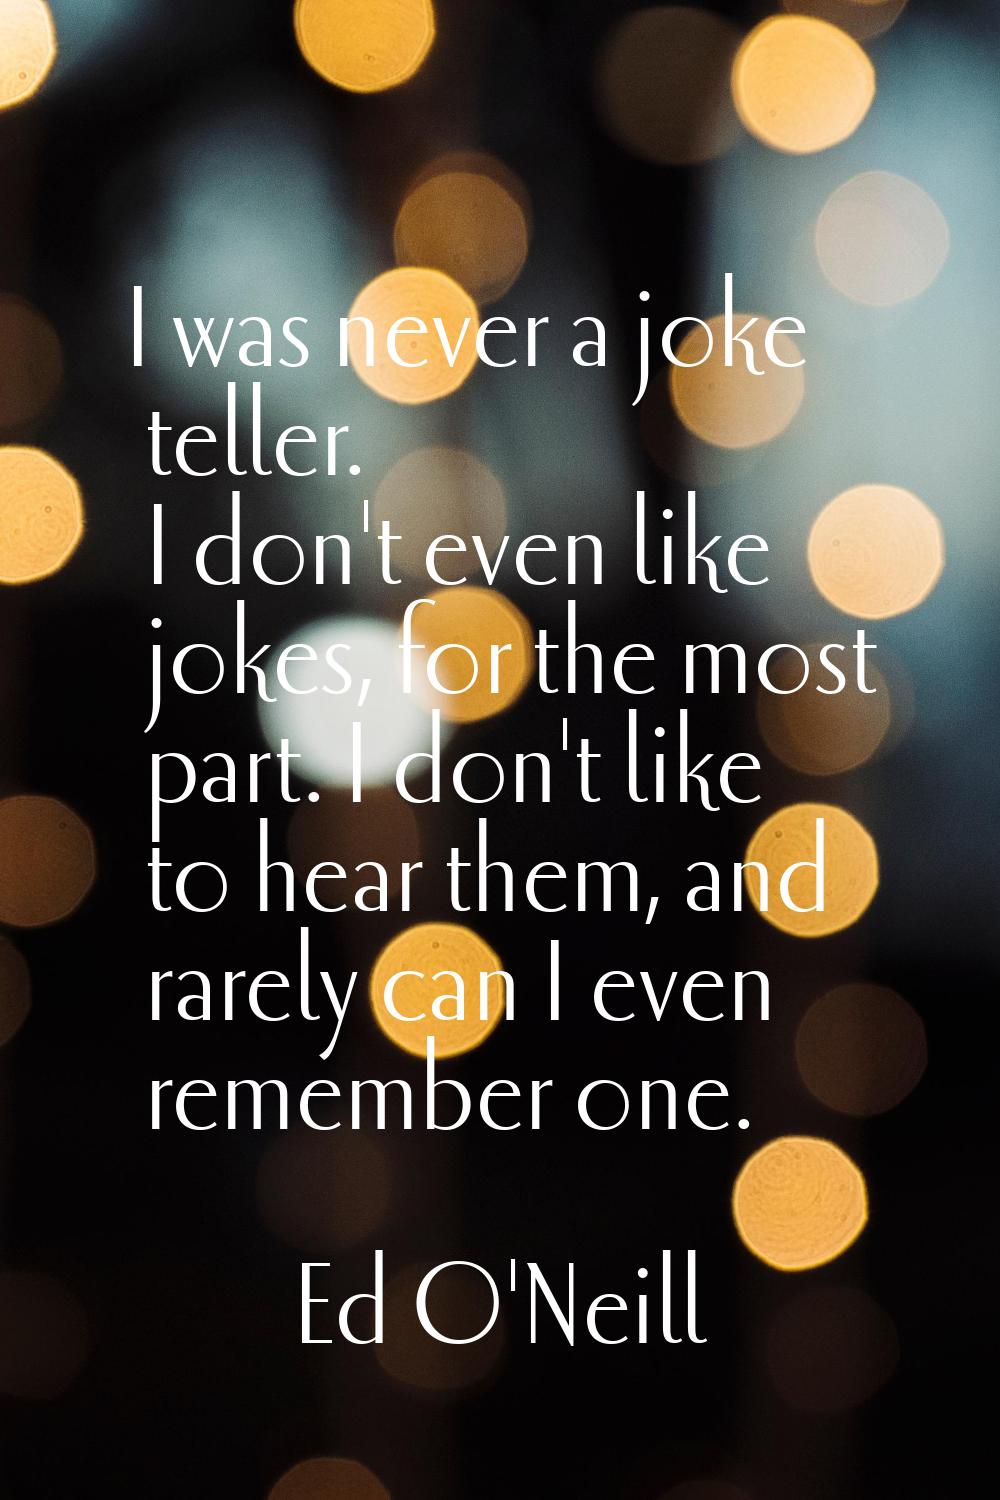 I was never a joke teller. I don't even like jokes, for the most part. I don't like to hear them, a